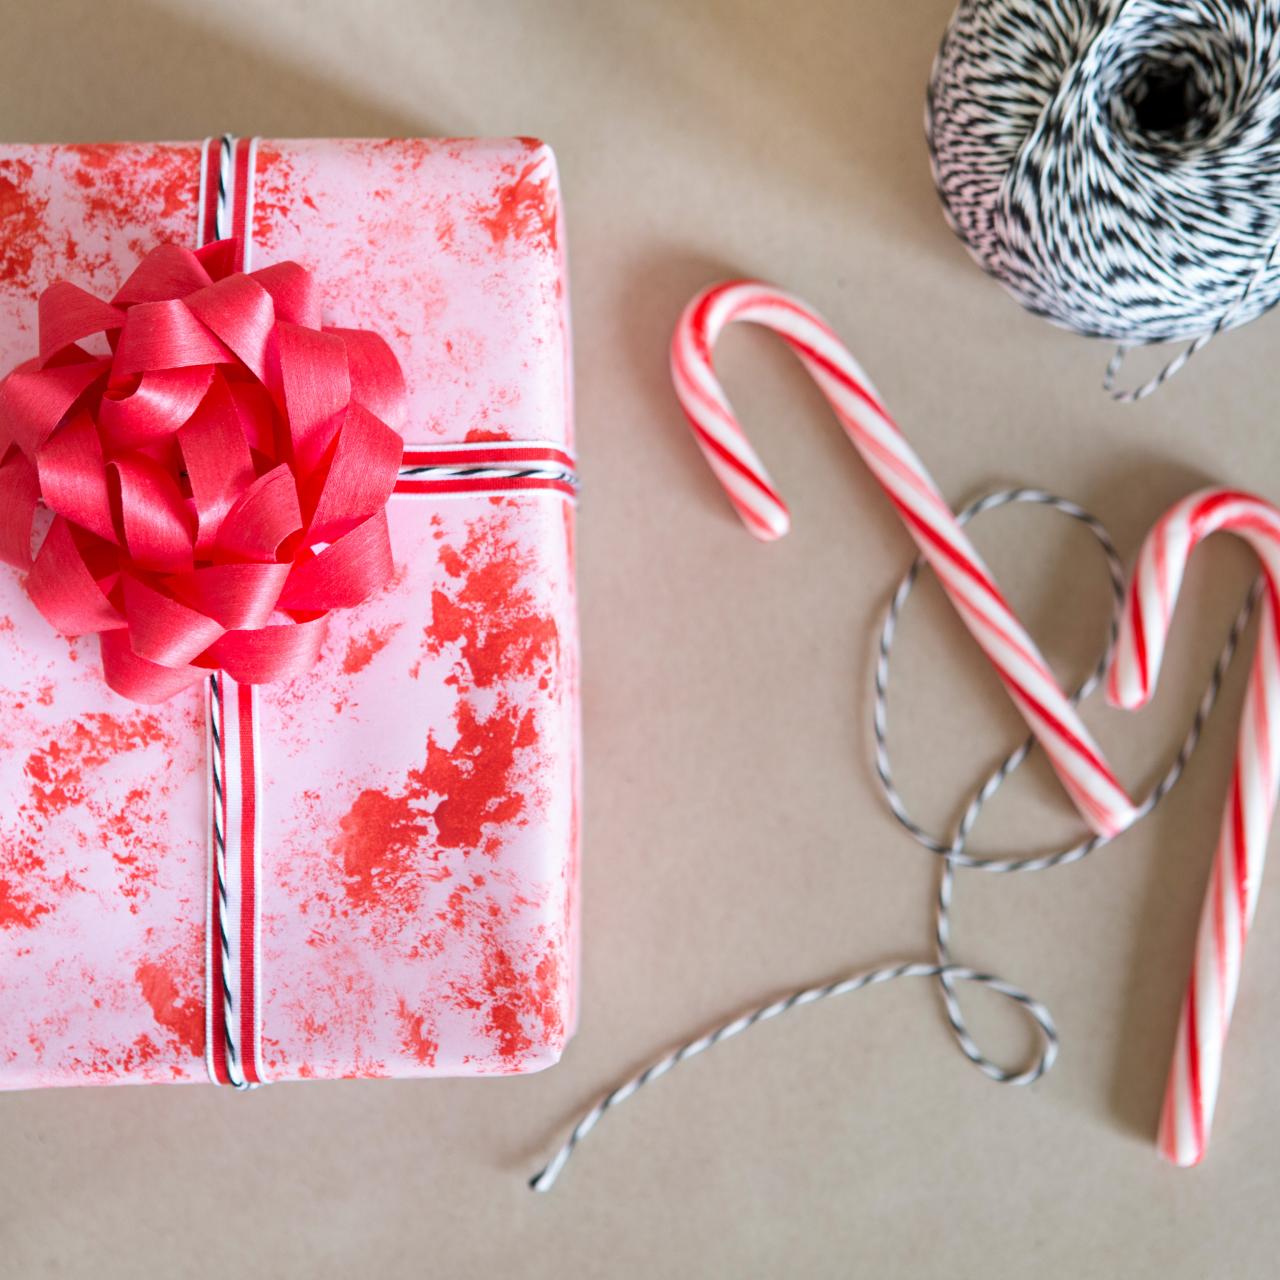 Unique Gift Wrapping Ideas Add That Special Touch - DIY Candy